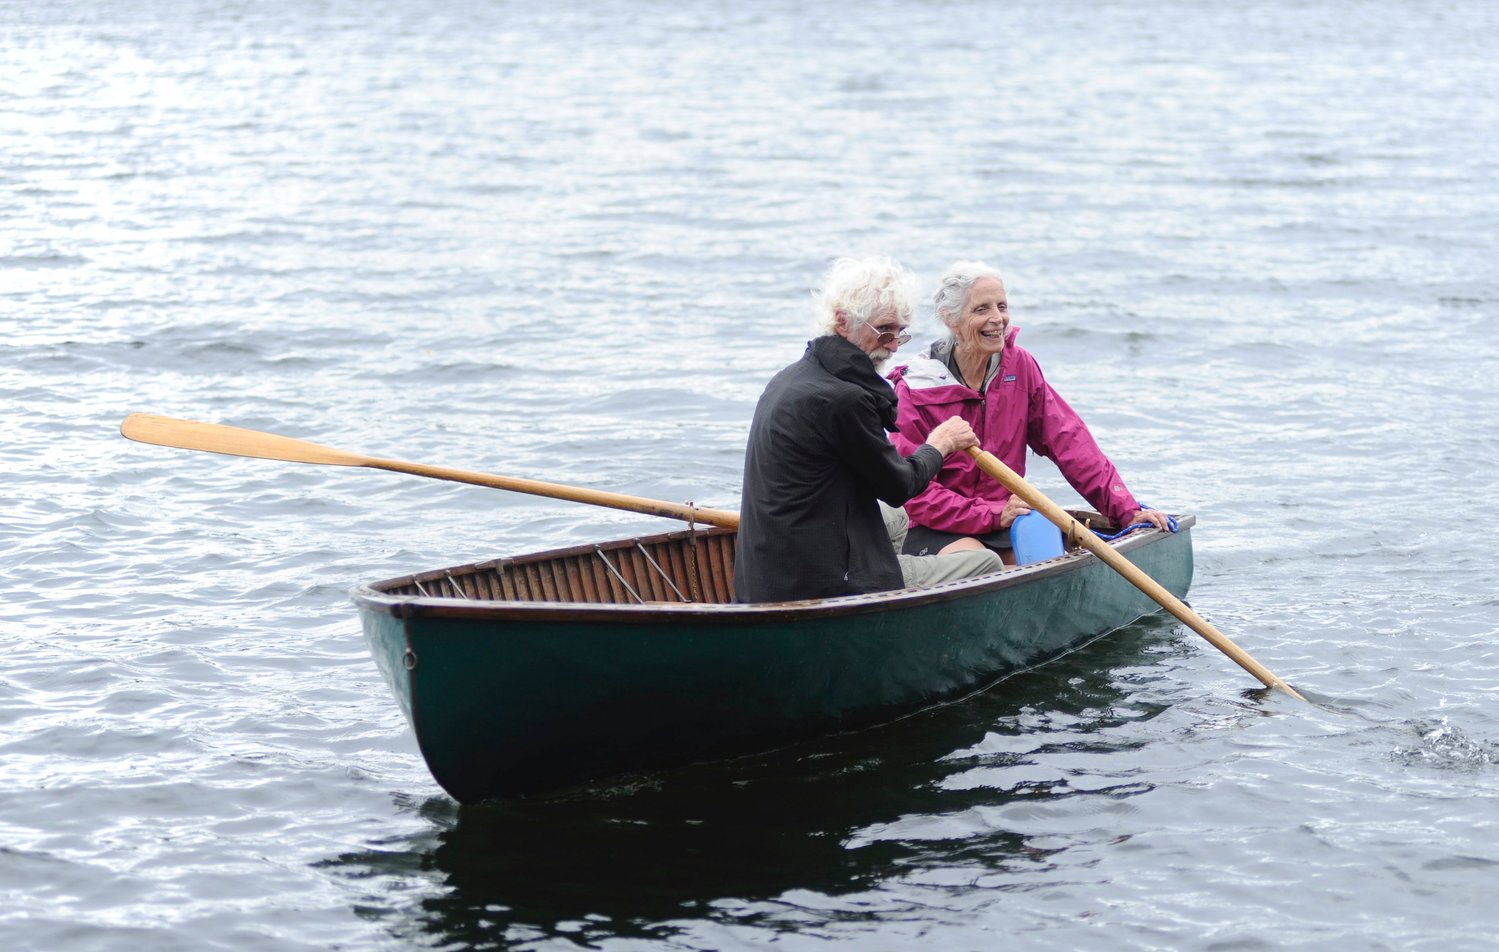 Safe passage. Zeke Boyle, master woodworker, restorer of vintage barns and co-founder of the Beechwoods Yacht Club, and his wife Ginny, navigated the chop on the lake from the public access to the café’s docks. The couple are pictured in a 1948 Penn Yan Cartopper, the club’s first restoration project.